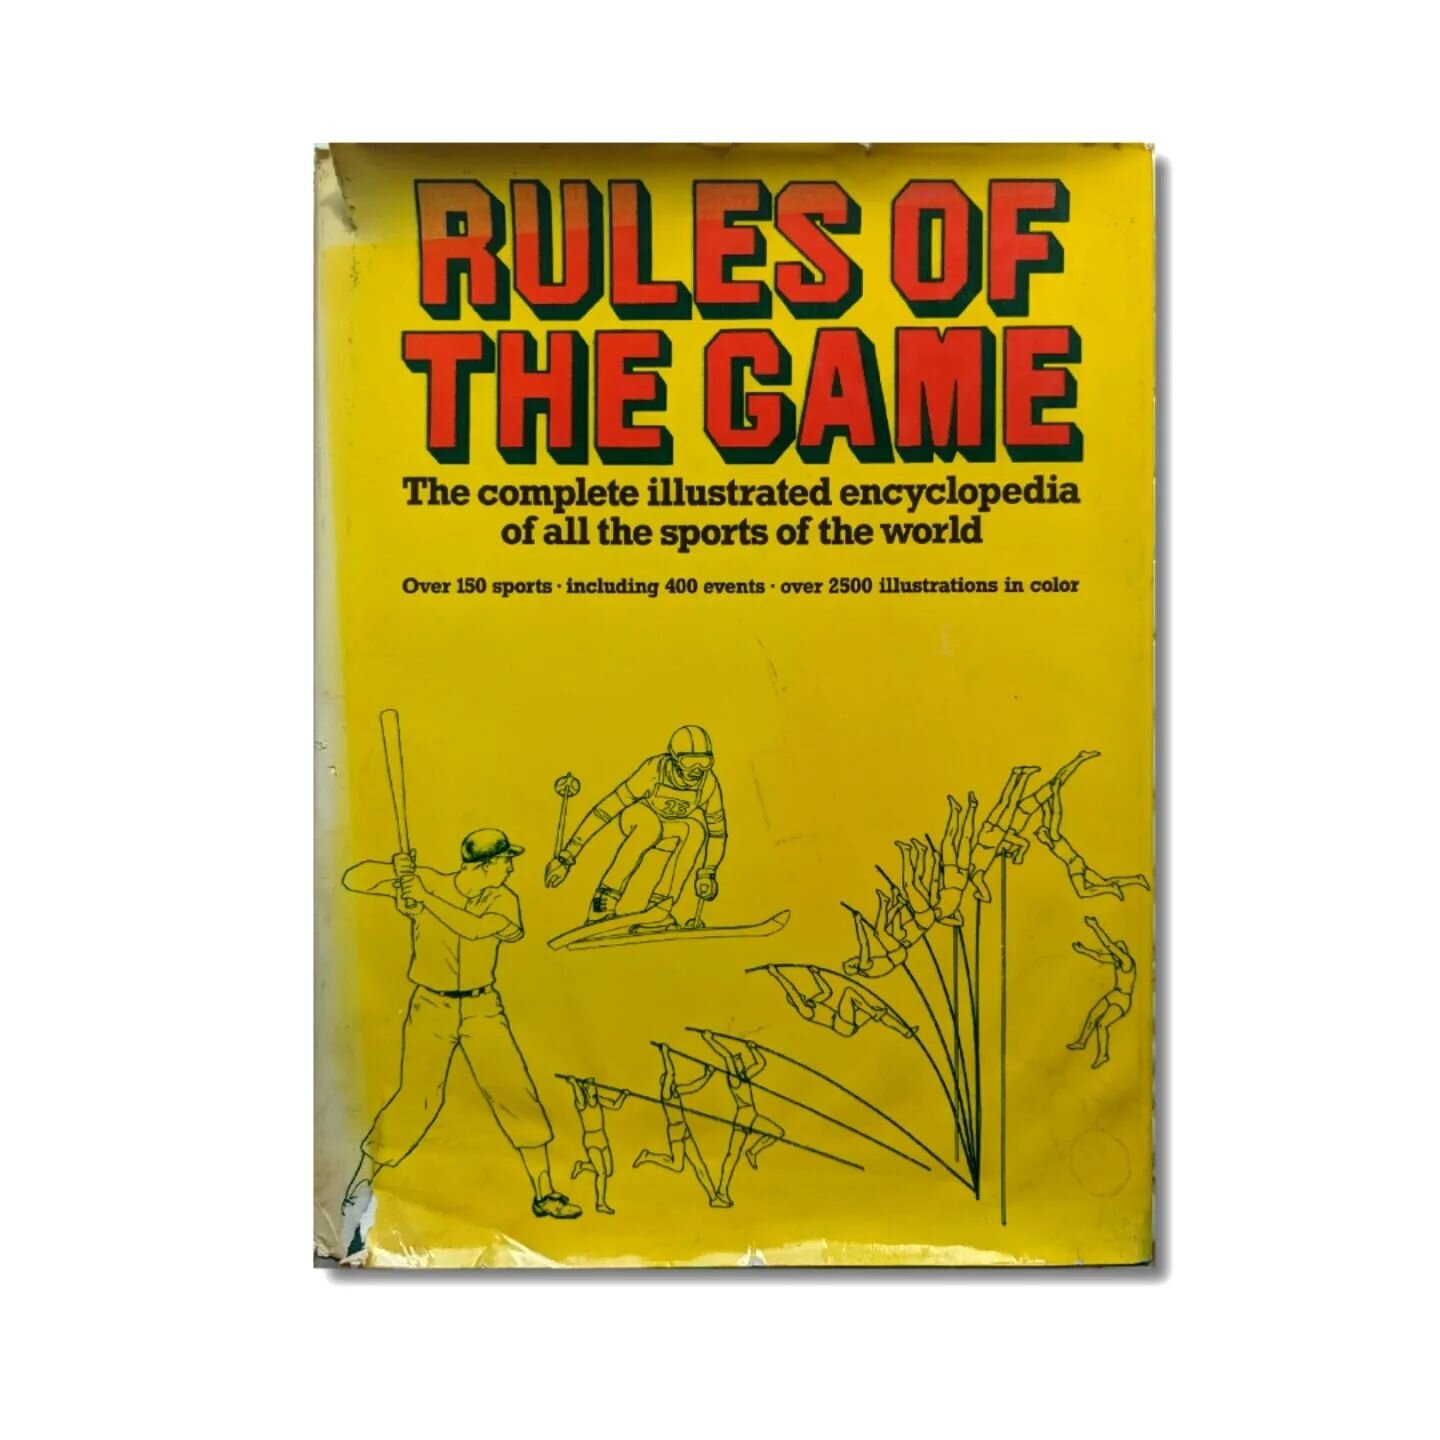 Rules of The Game - Illustrated coffee table book featuring all of the sports. Read, learn and improve your skills. There is still time to go pro and impress your dad.